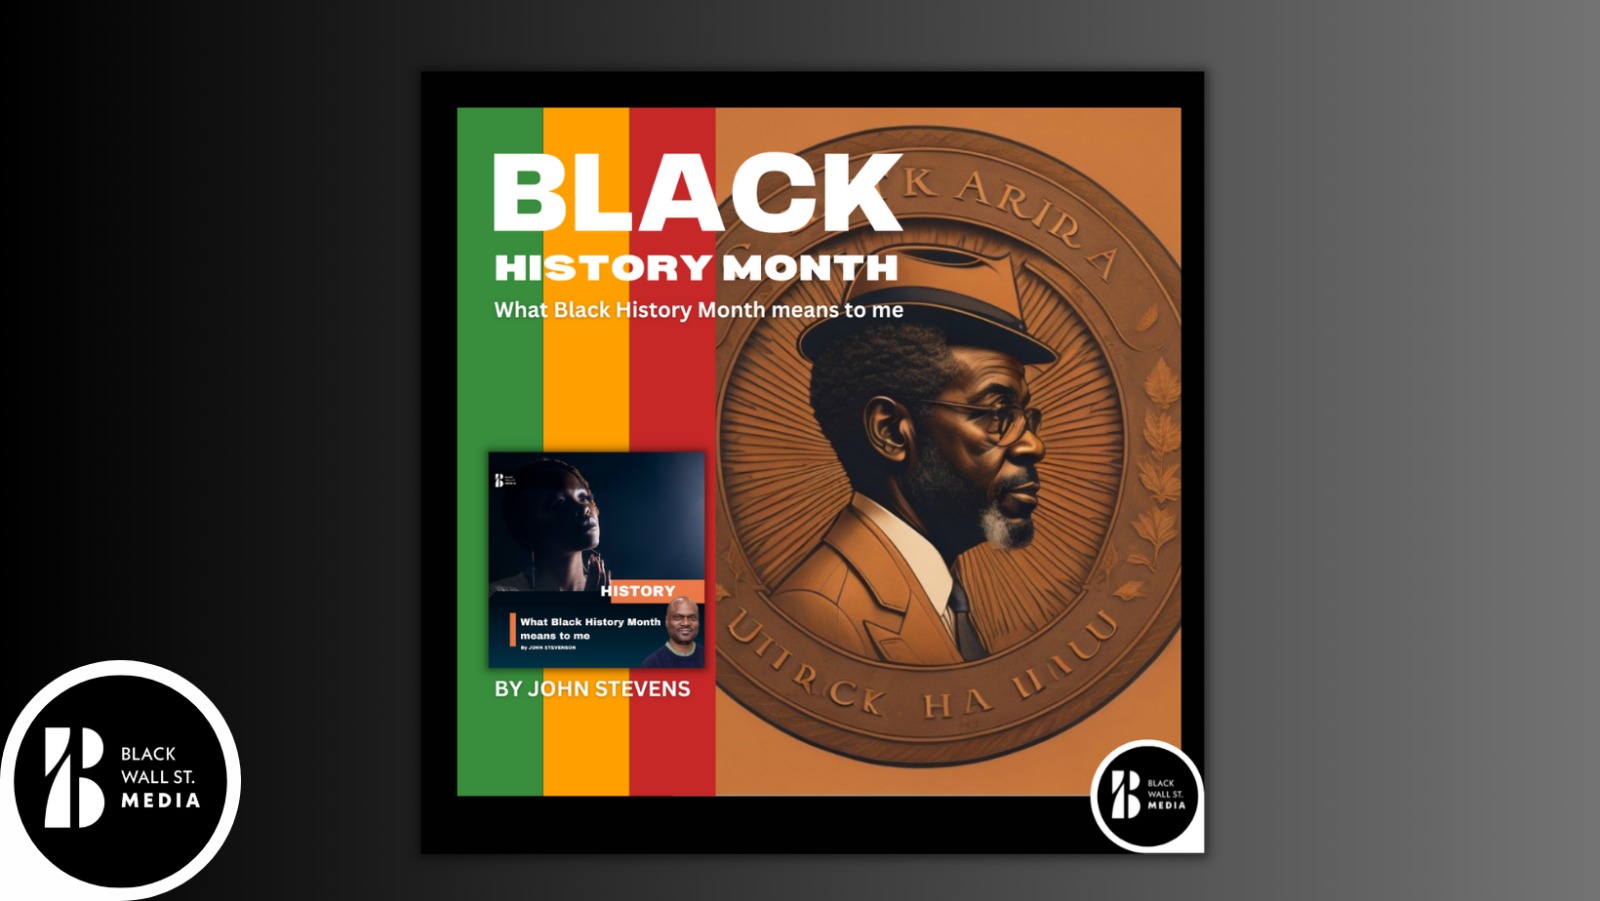 What Black History Month means to me